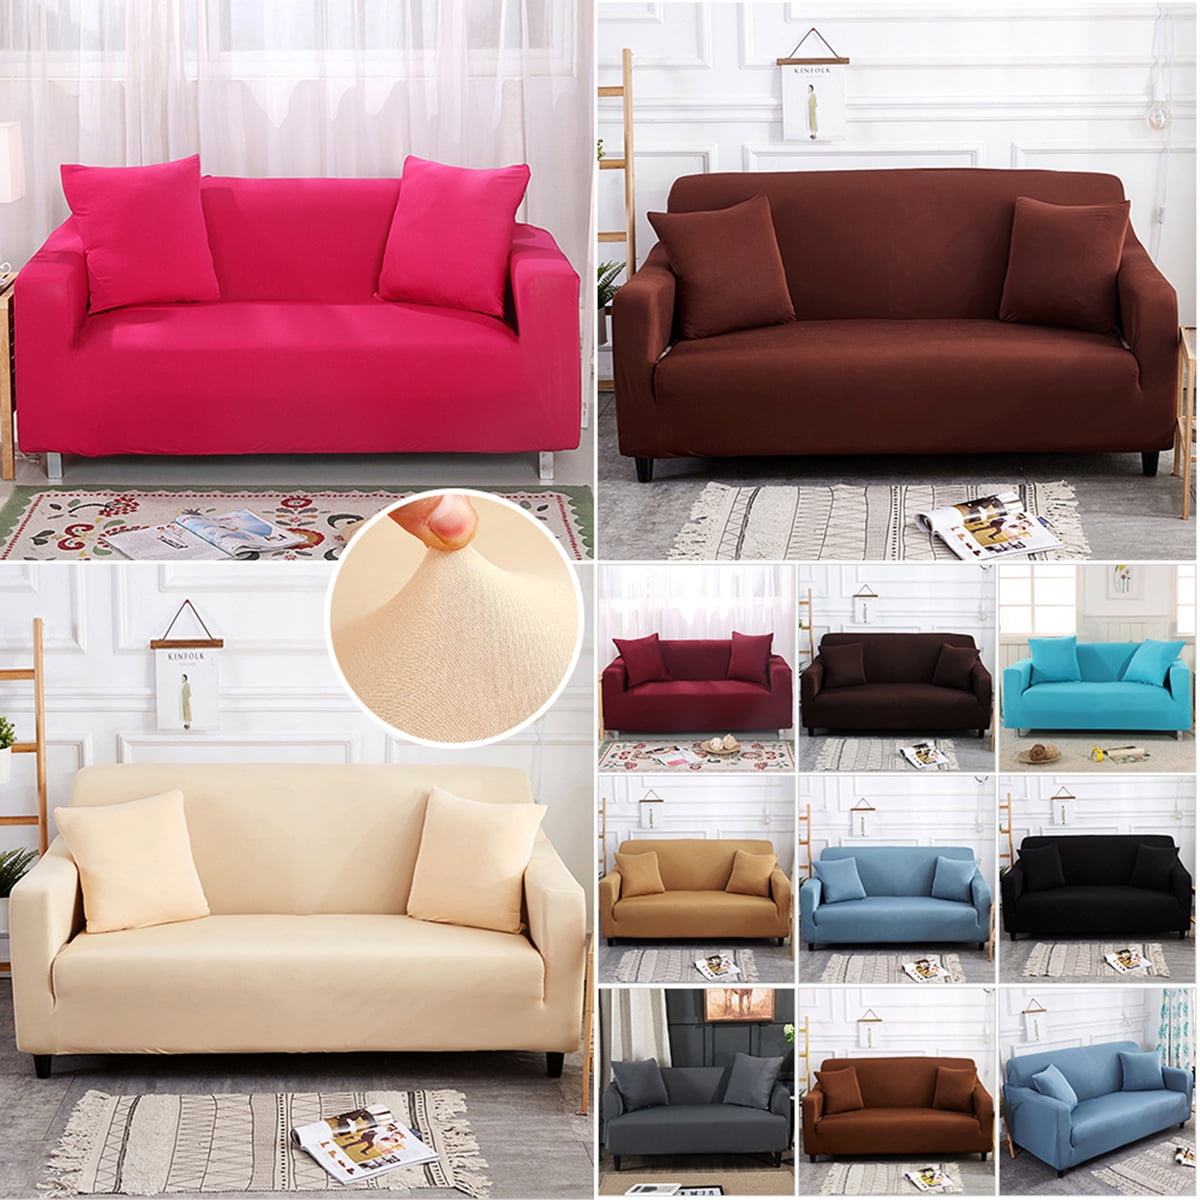 Details about   Washable Soild Color Sofa Slipcover Soft With Elastic Spandex Fabric 1-4 Seater 